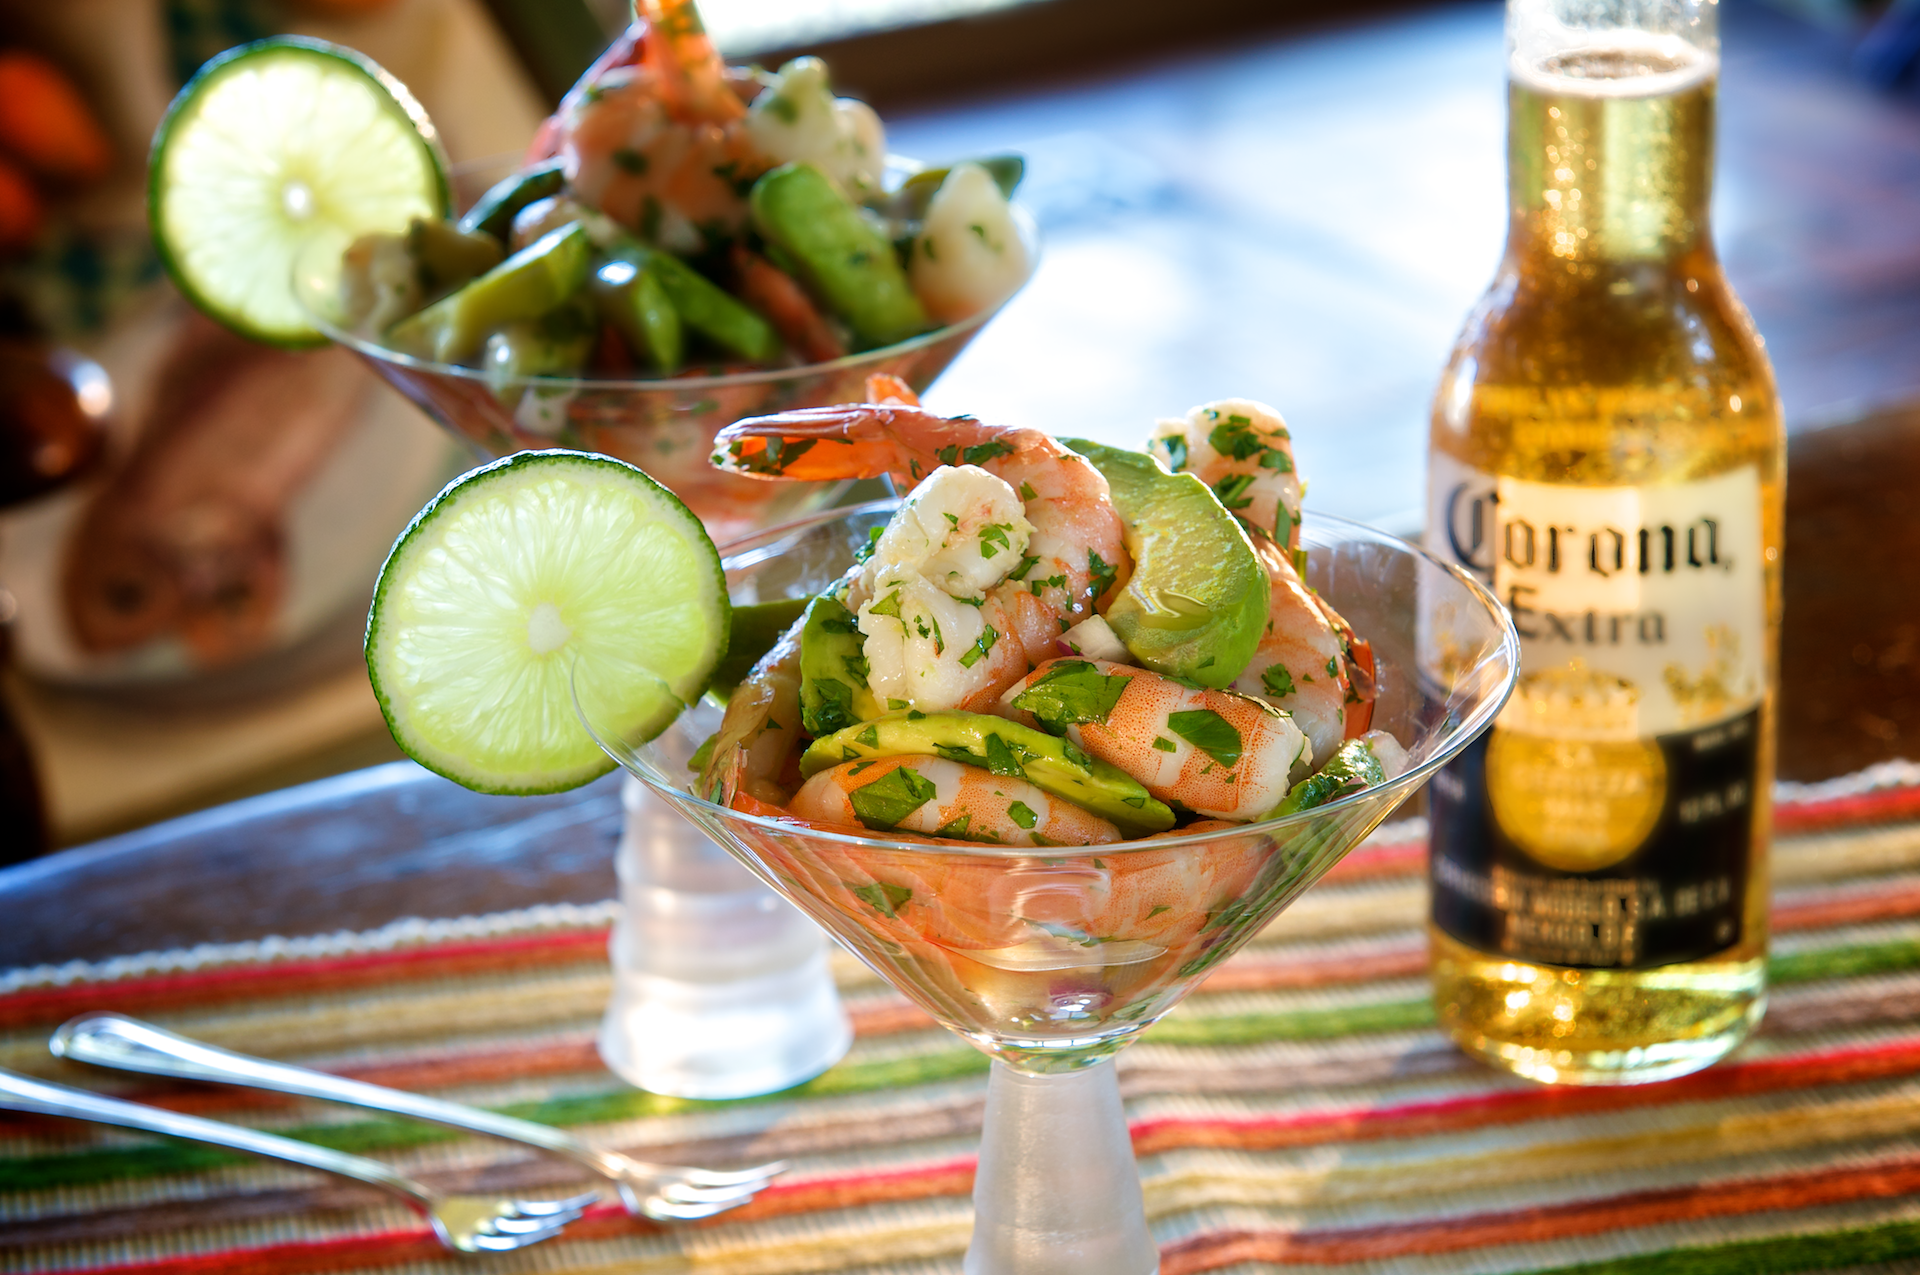 A shrimp cocktail with a spicy Mexican twist, made with fresh ingredients such as avocados, onions, and jalapenos! This dish is a fiesta for the senses.